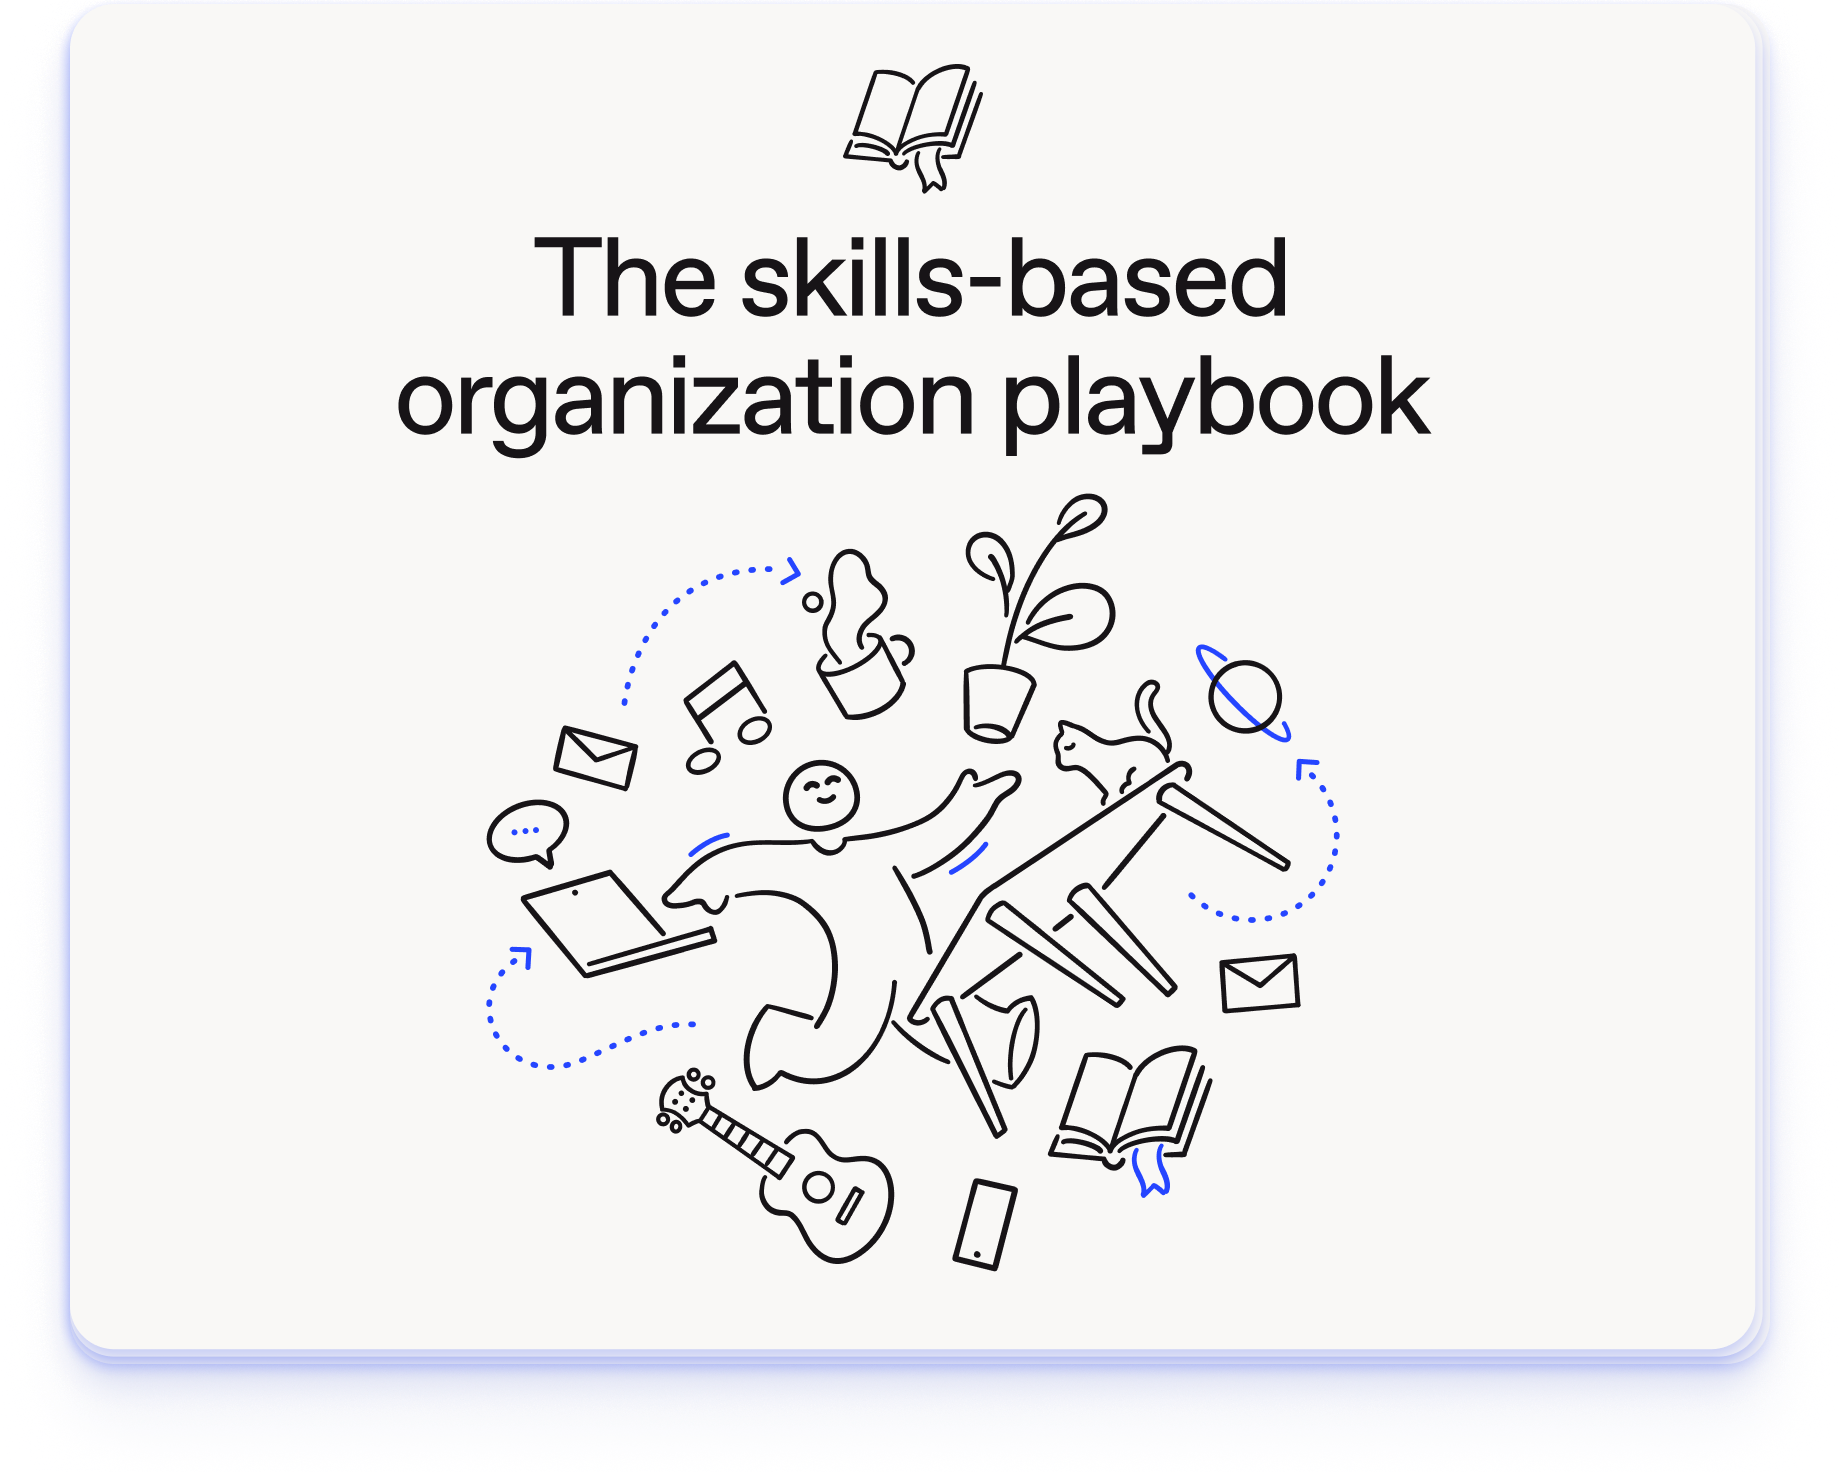 the cover of the ebook that will talk about the skills-based organizations